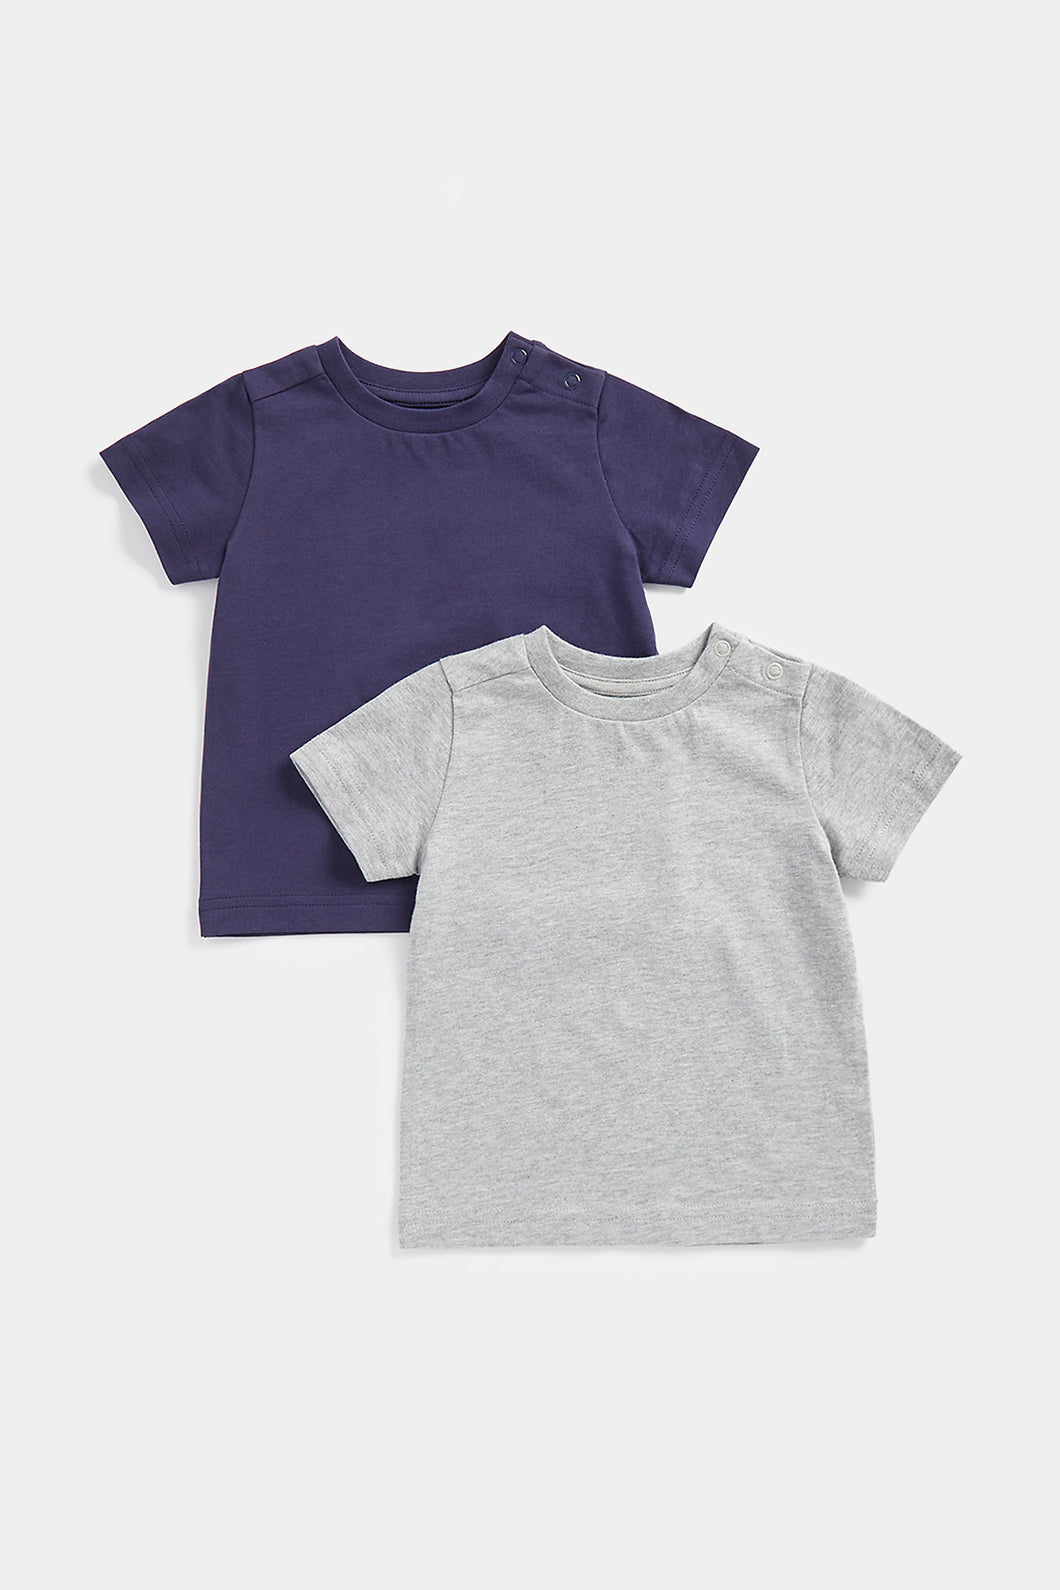 Mothercare Navy And Grey T-Shirts - 2 Pack